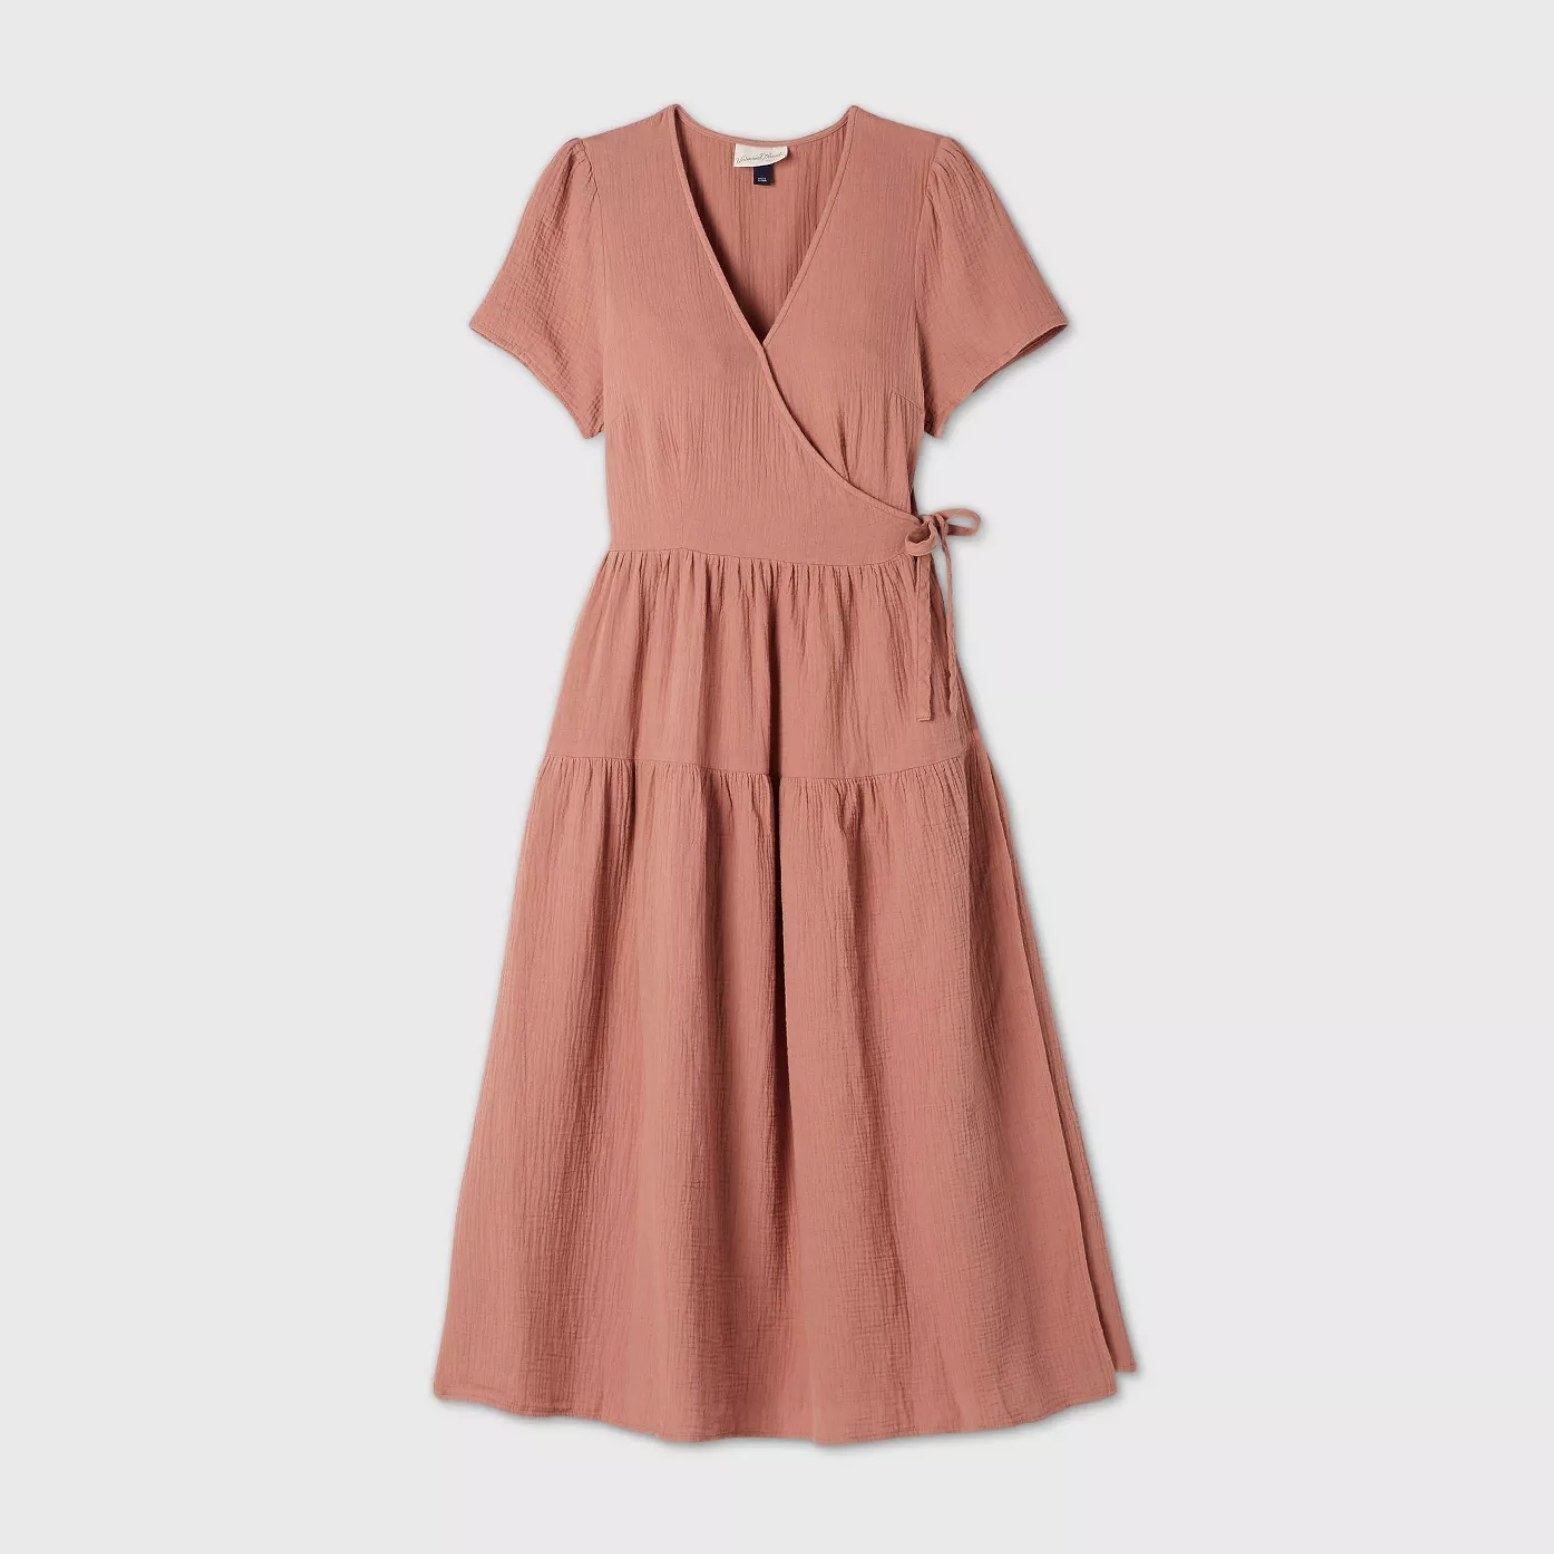 An image of a taupe wrap midi dress with a v neckline and short sleeves